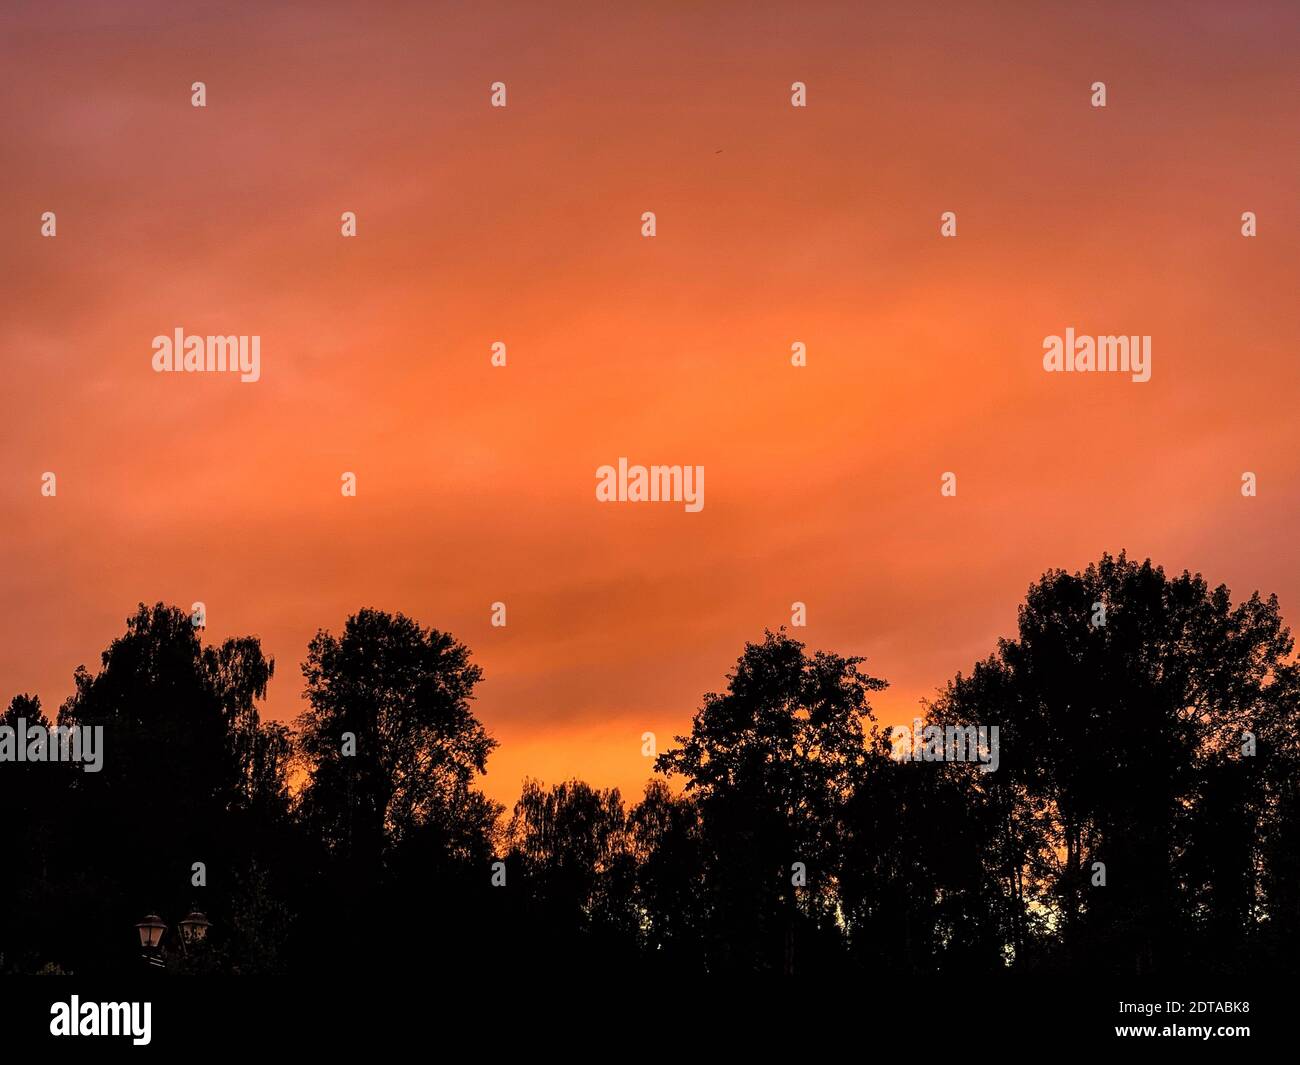 Low Angle View Of Silhouette Trees Against Orange Sky Stock Photo